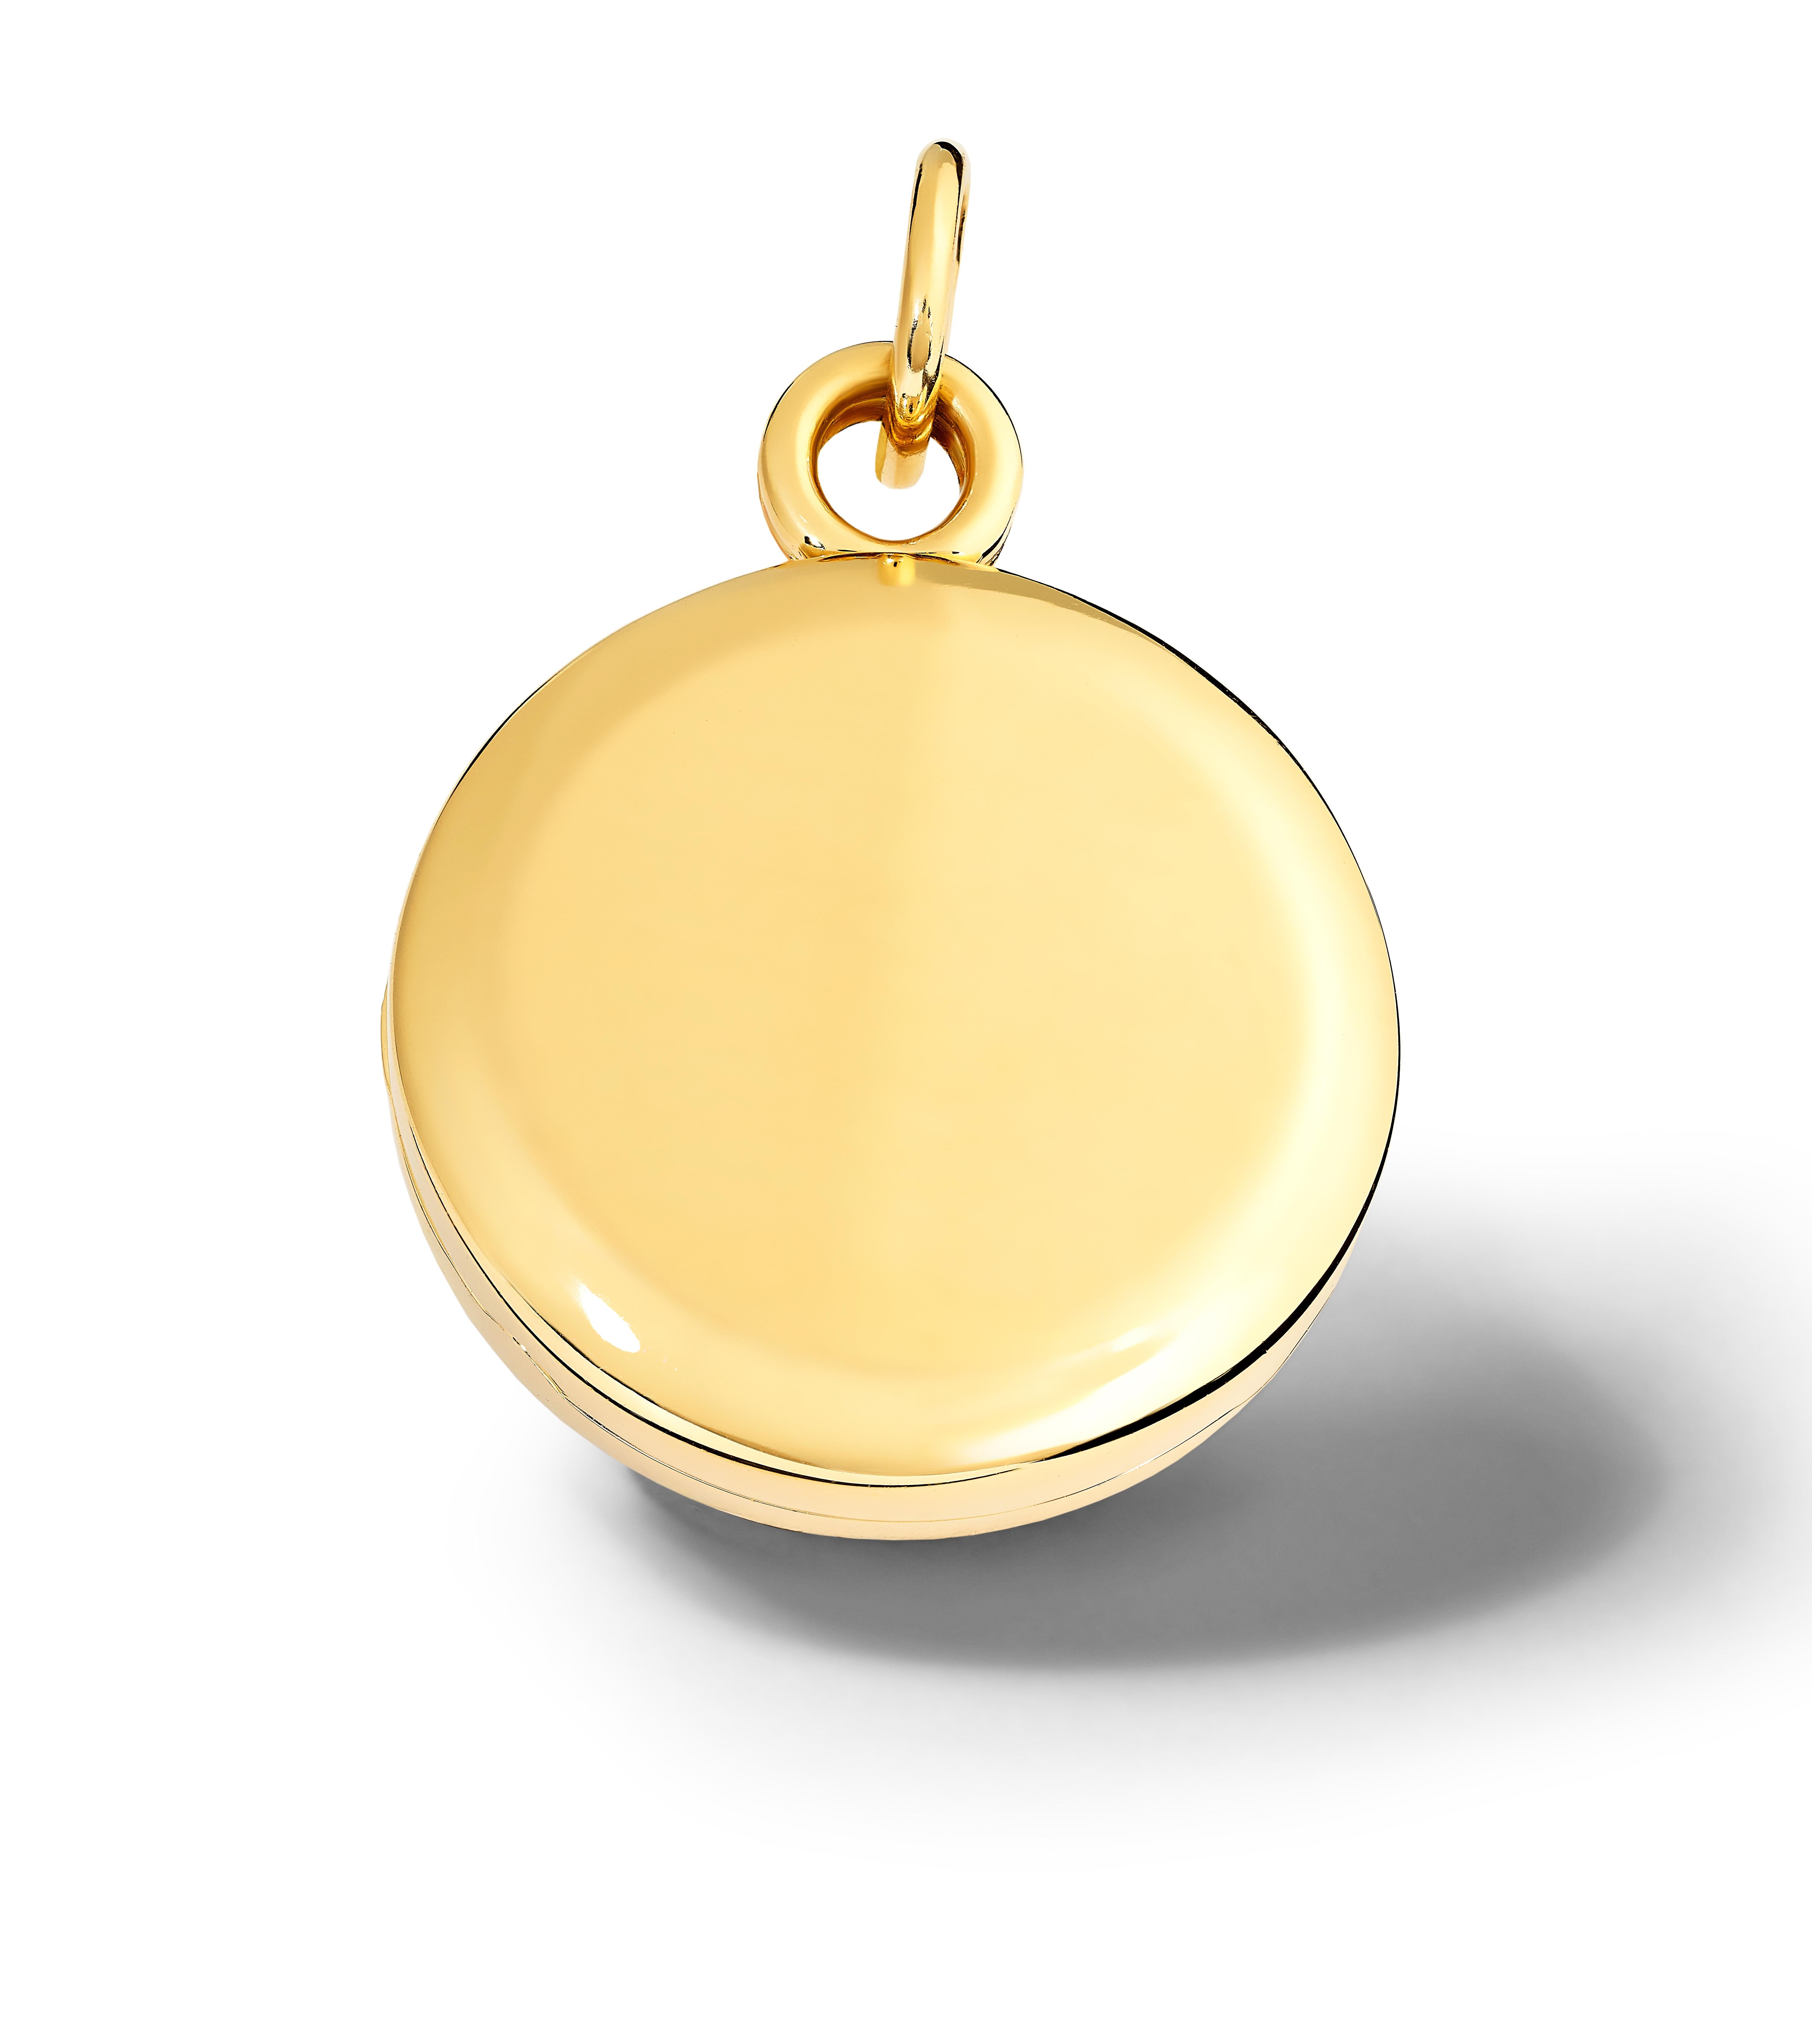 Annie necklace pendant locket in 9 carat yellow gold with four folding compartments for photographs.

Chain not included. 